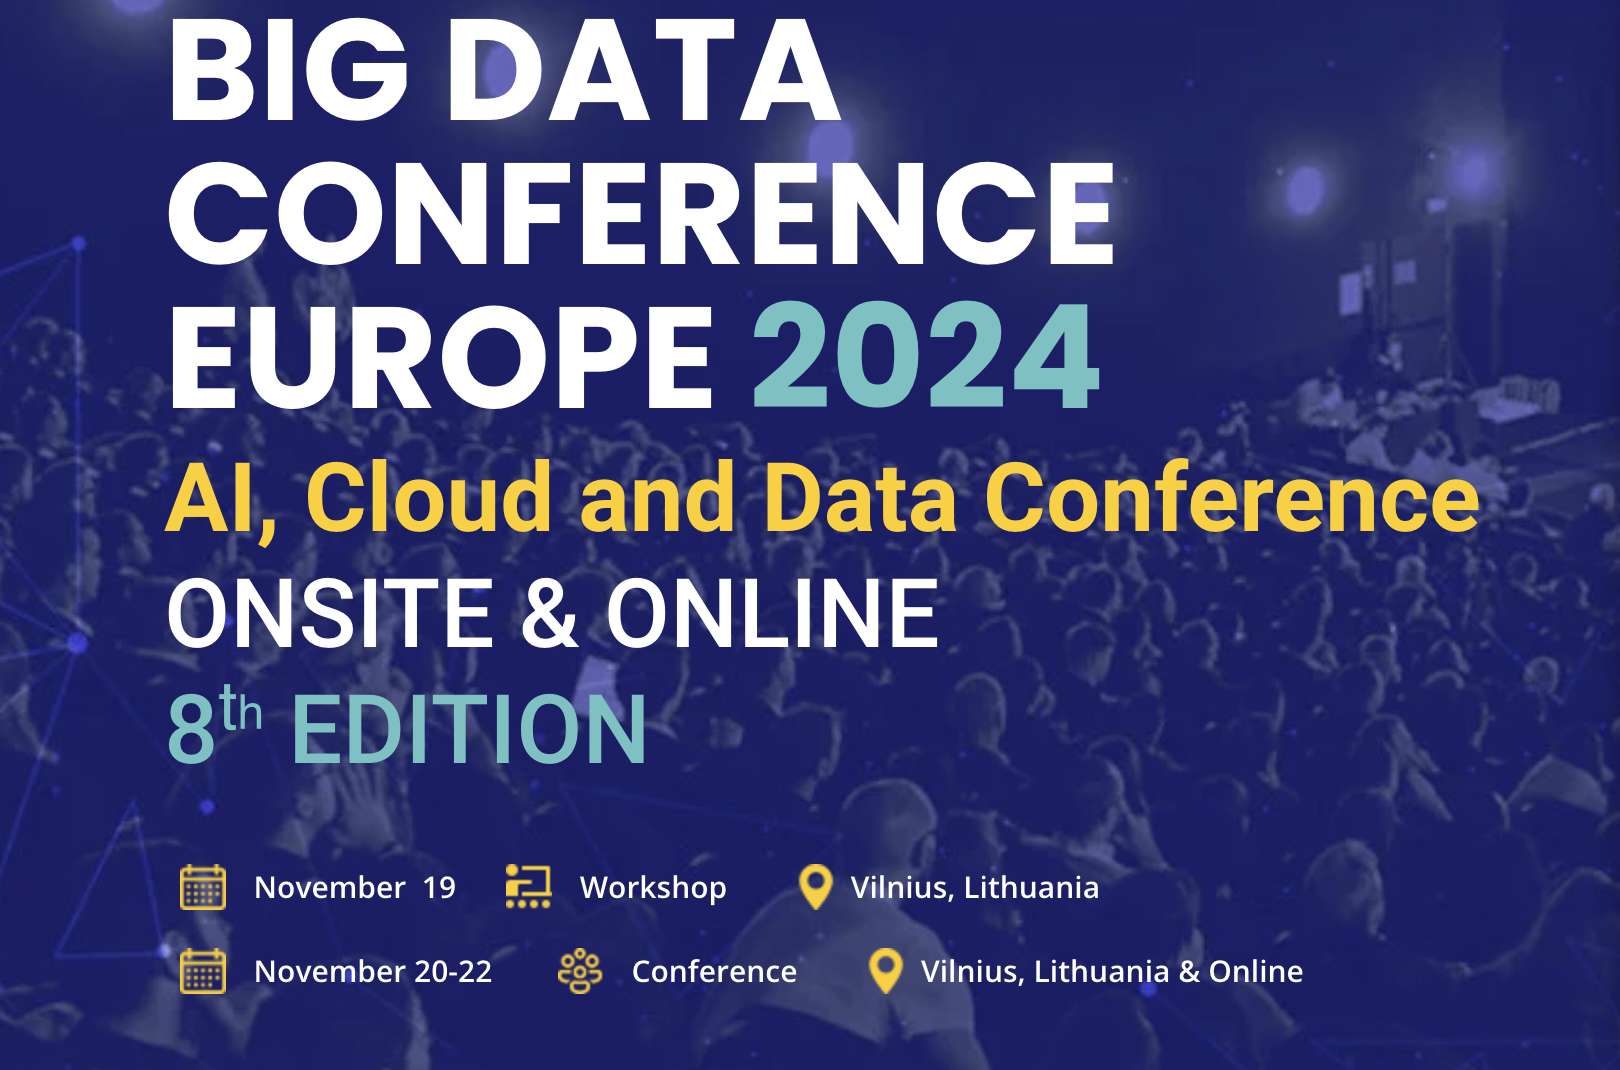 Big Data Conference Europe 2024